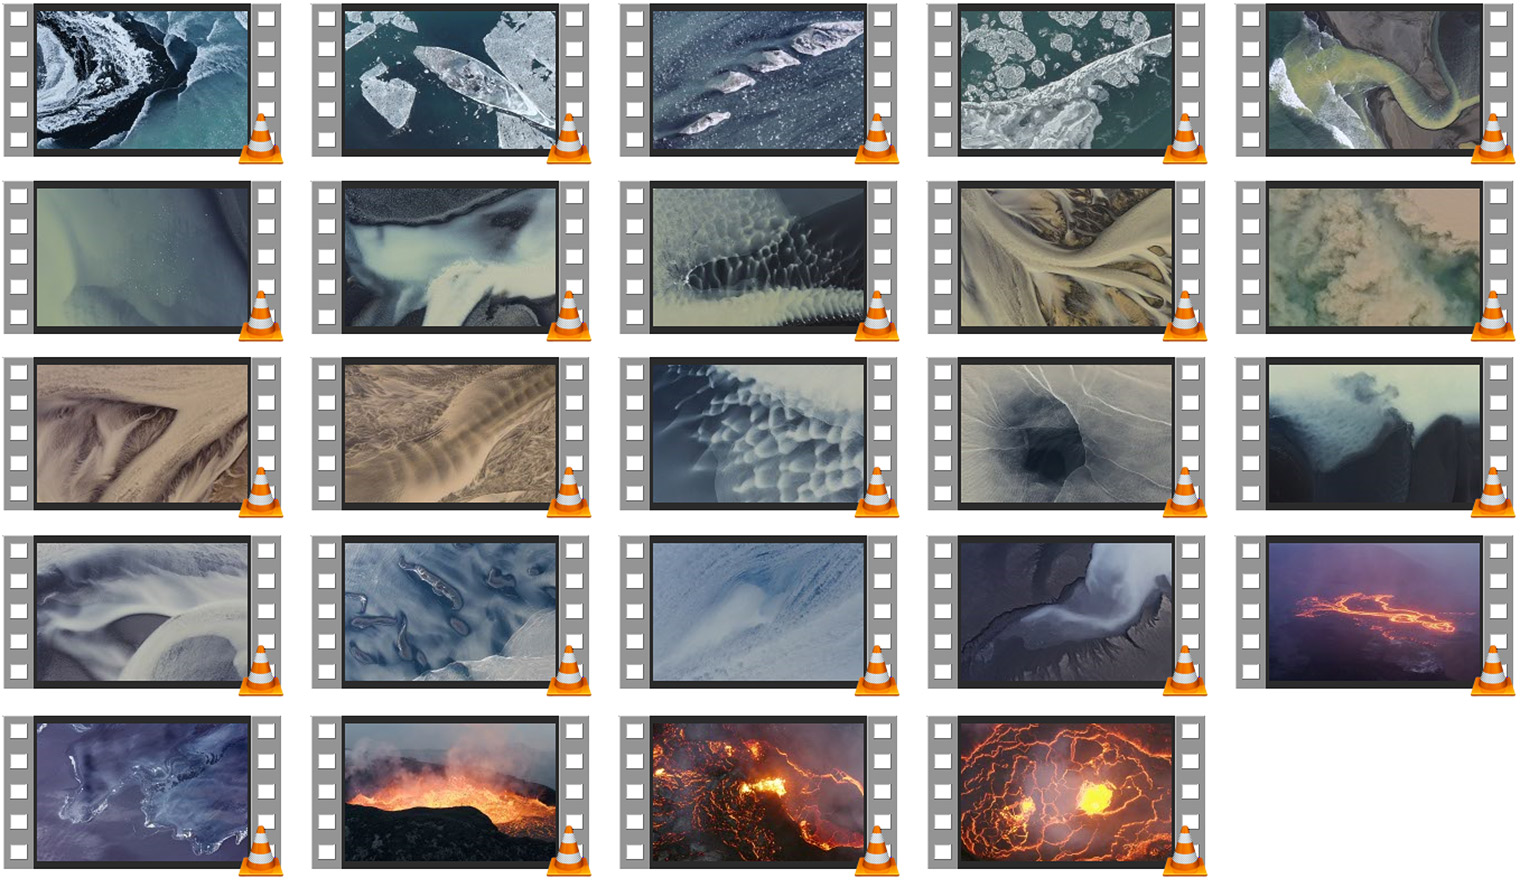 Video licensing of abstract landscapes